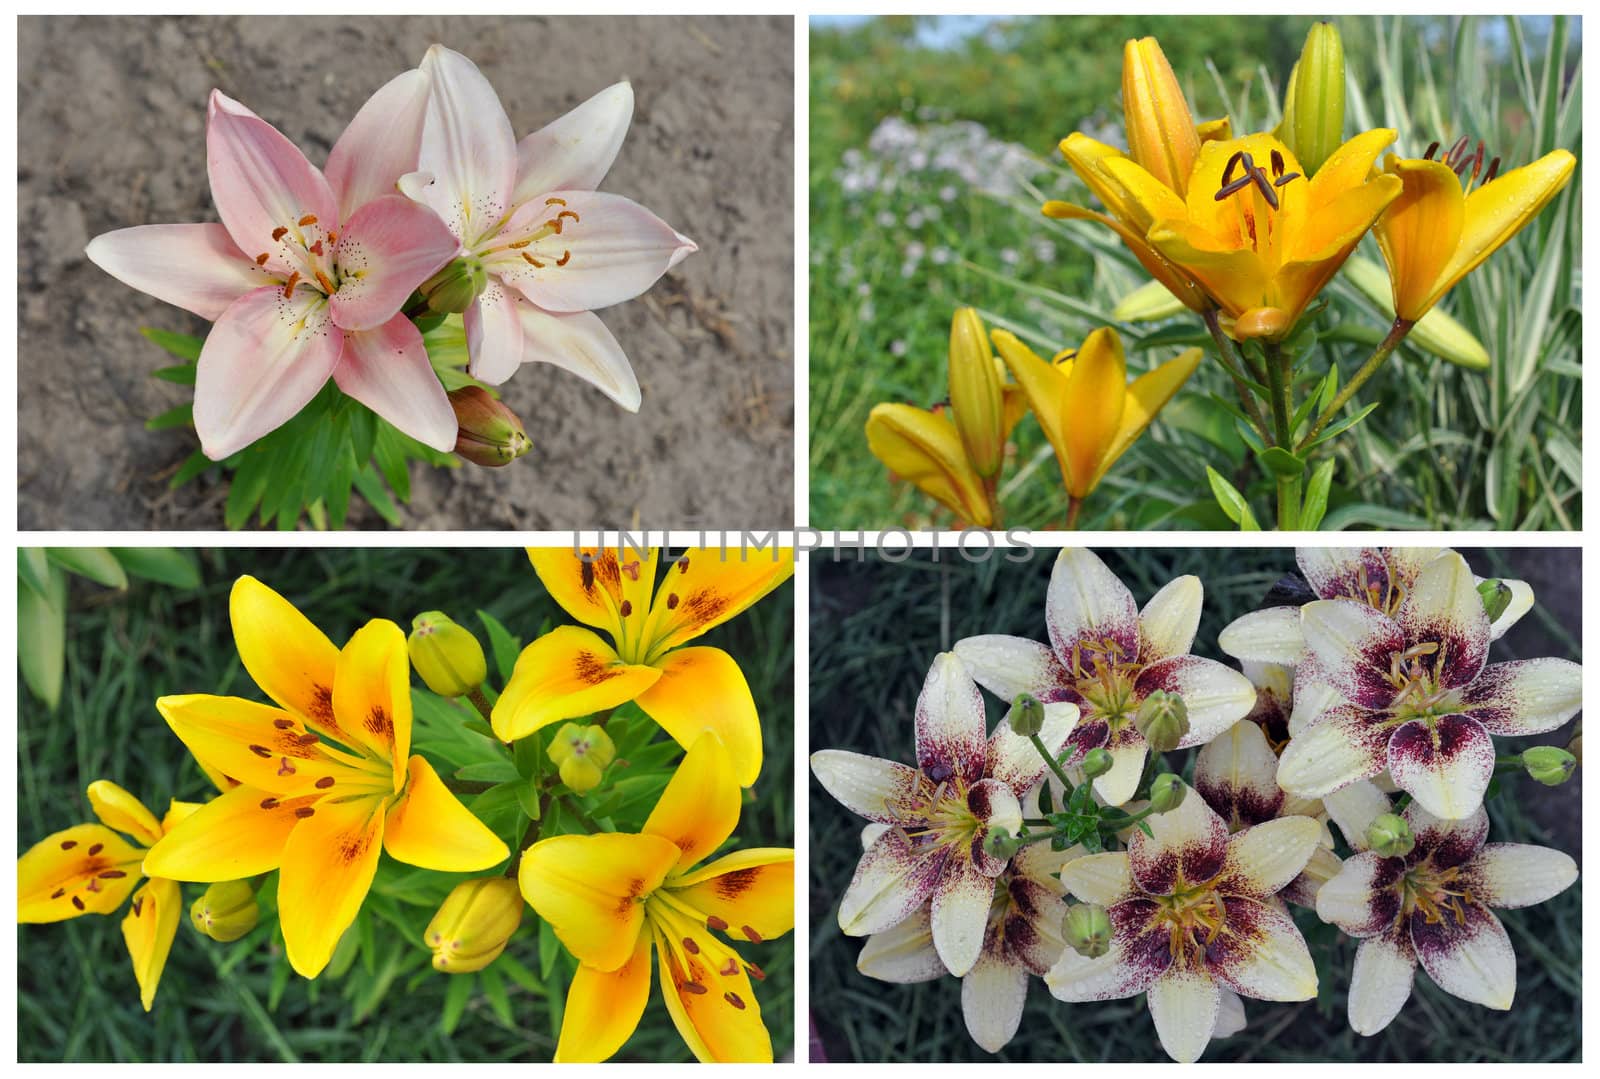 Flowers of a lily grows. Summer, July, Central Russia